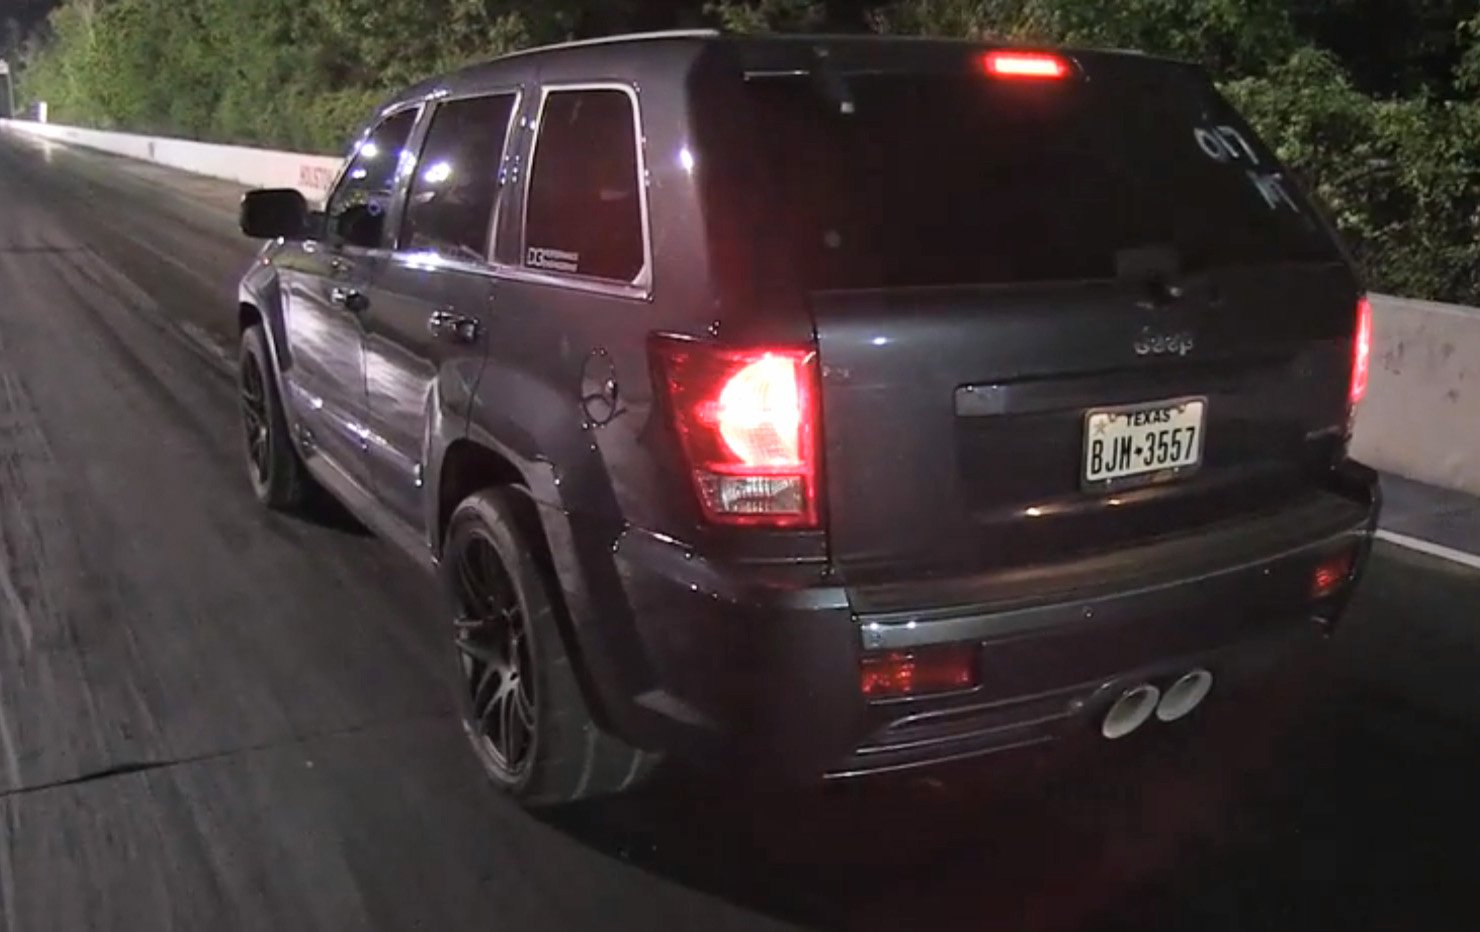 This Turbocharged 1,100 HP Jeep SRT8 Runs In The 9's!